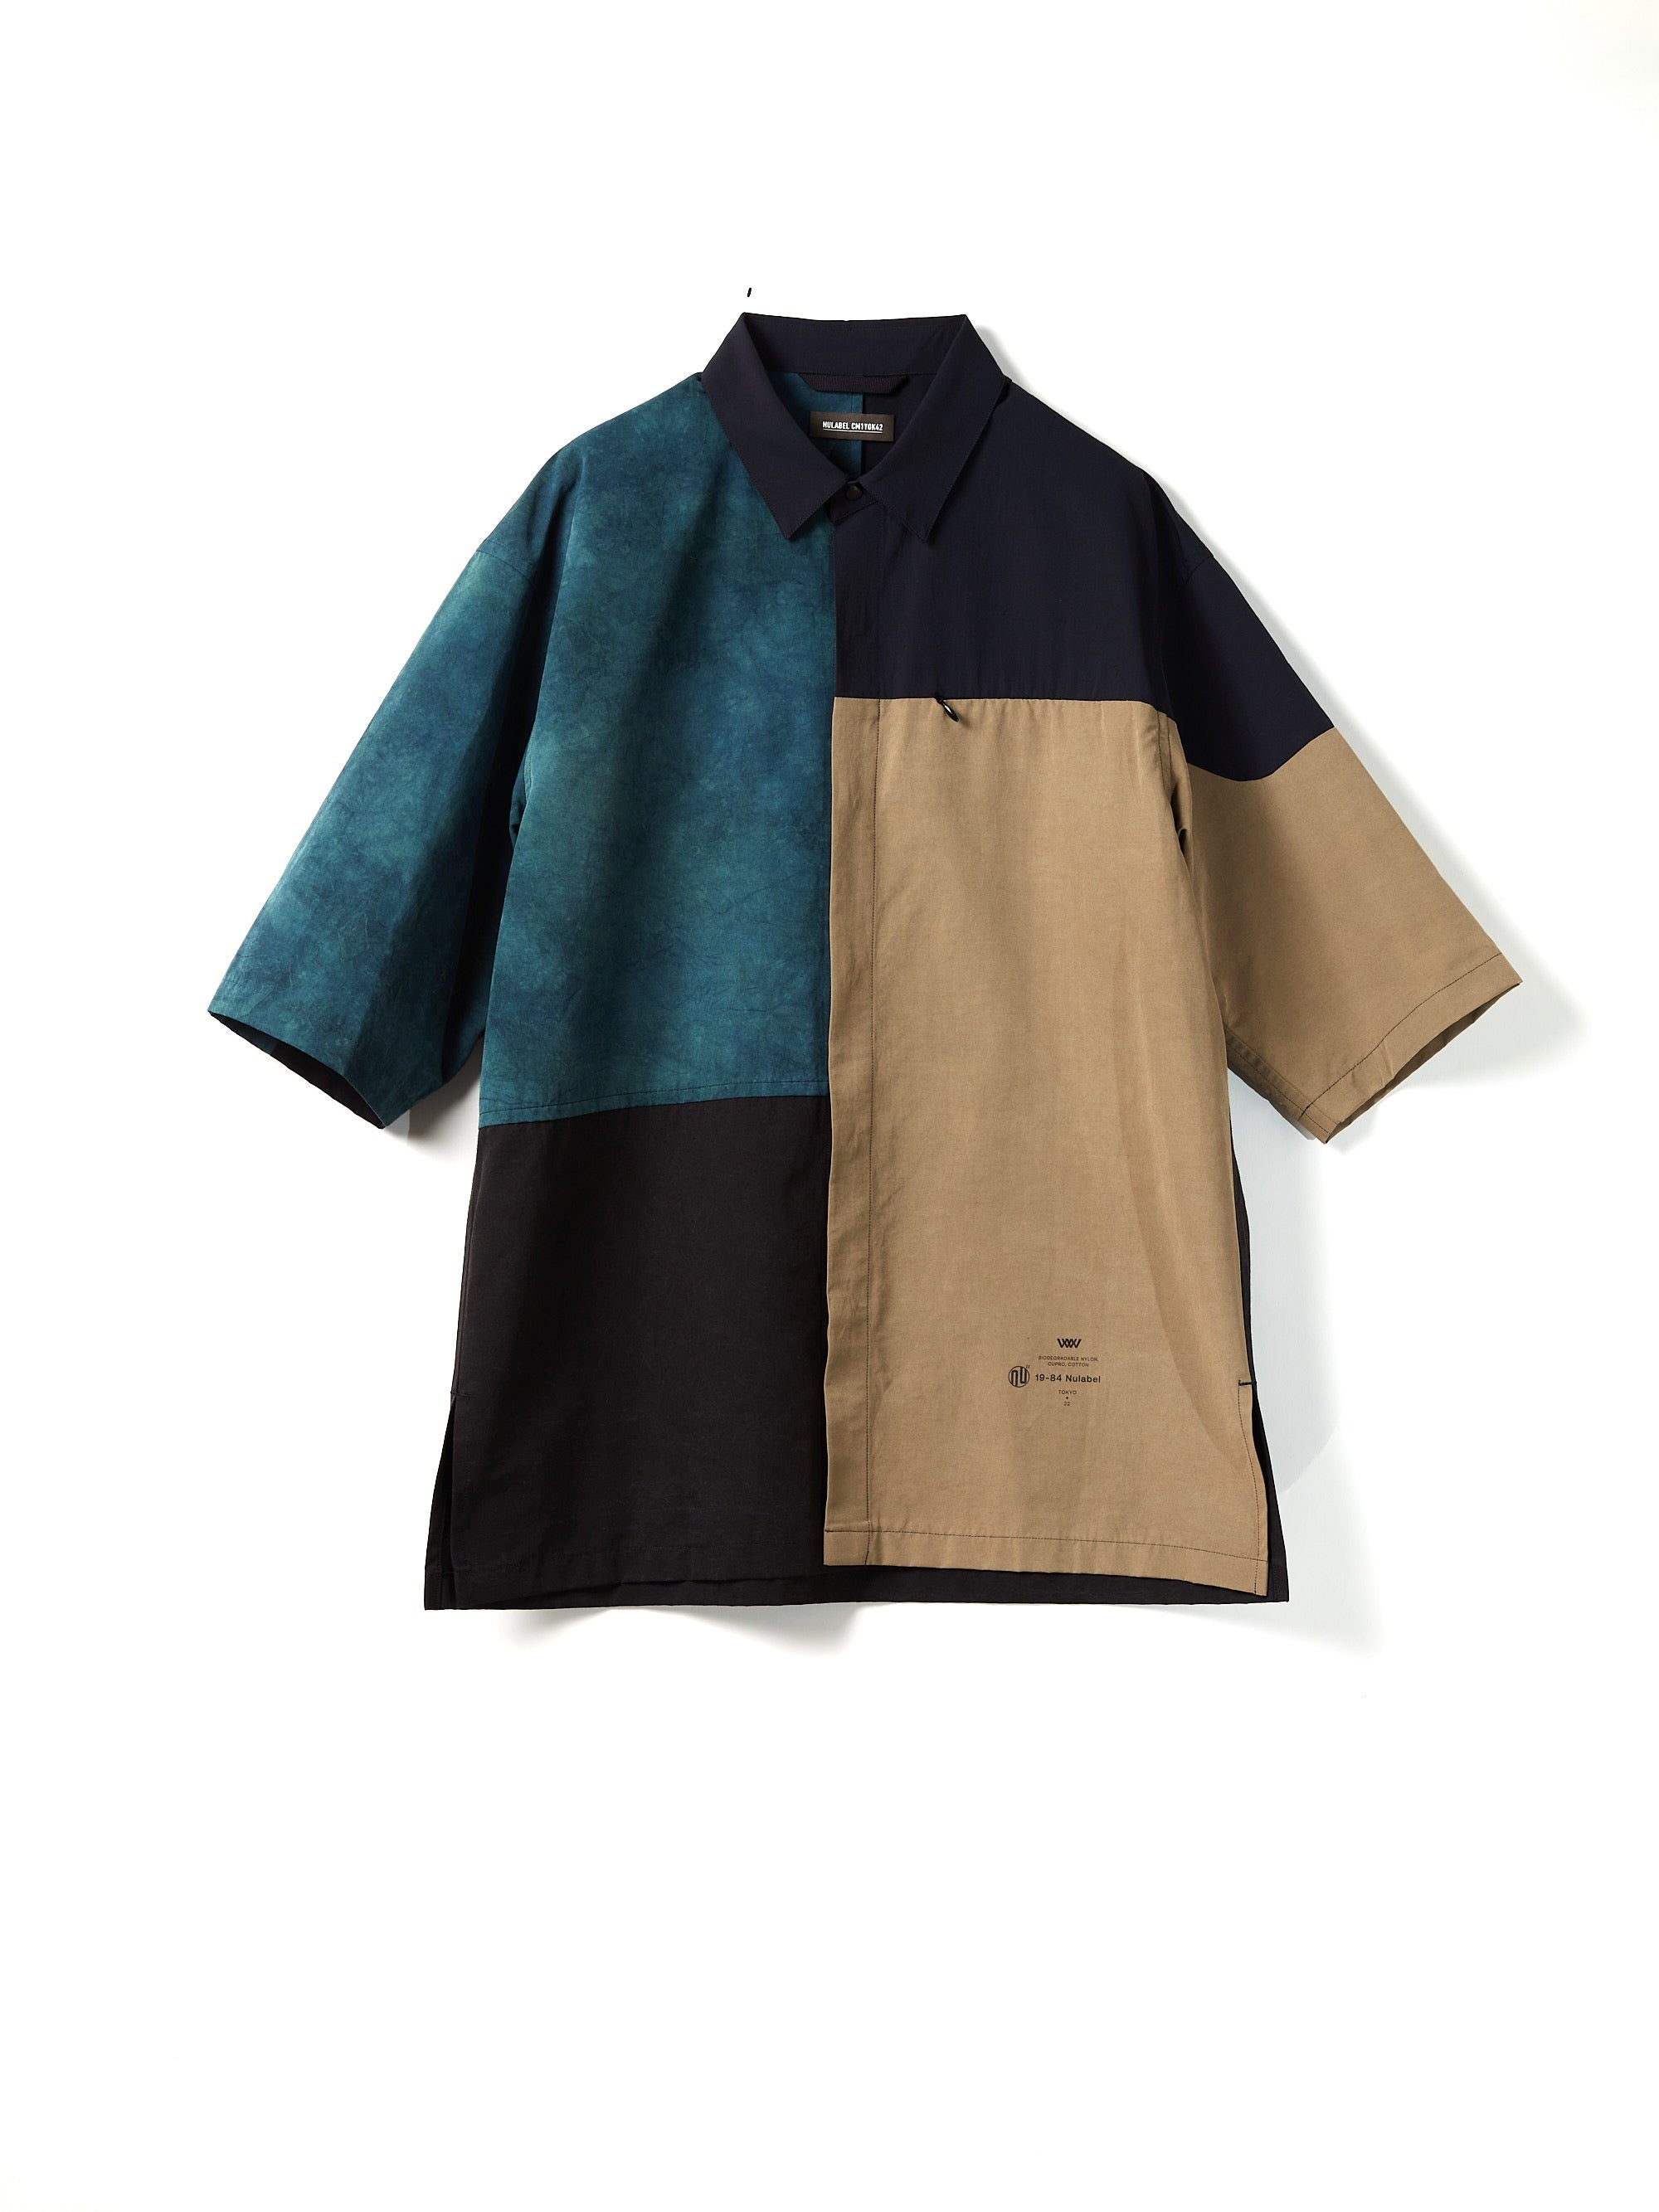 NULABEL(ニューレーベル)の22SS PATCH WORK SHIRT MULTI A(シャツ)の